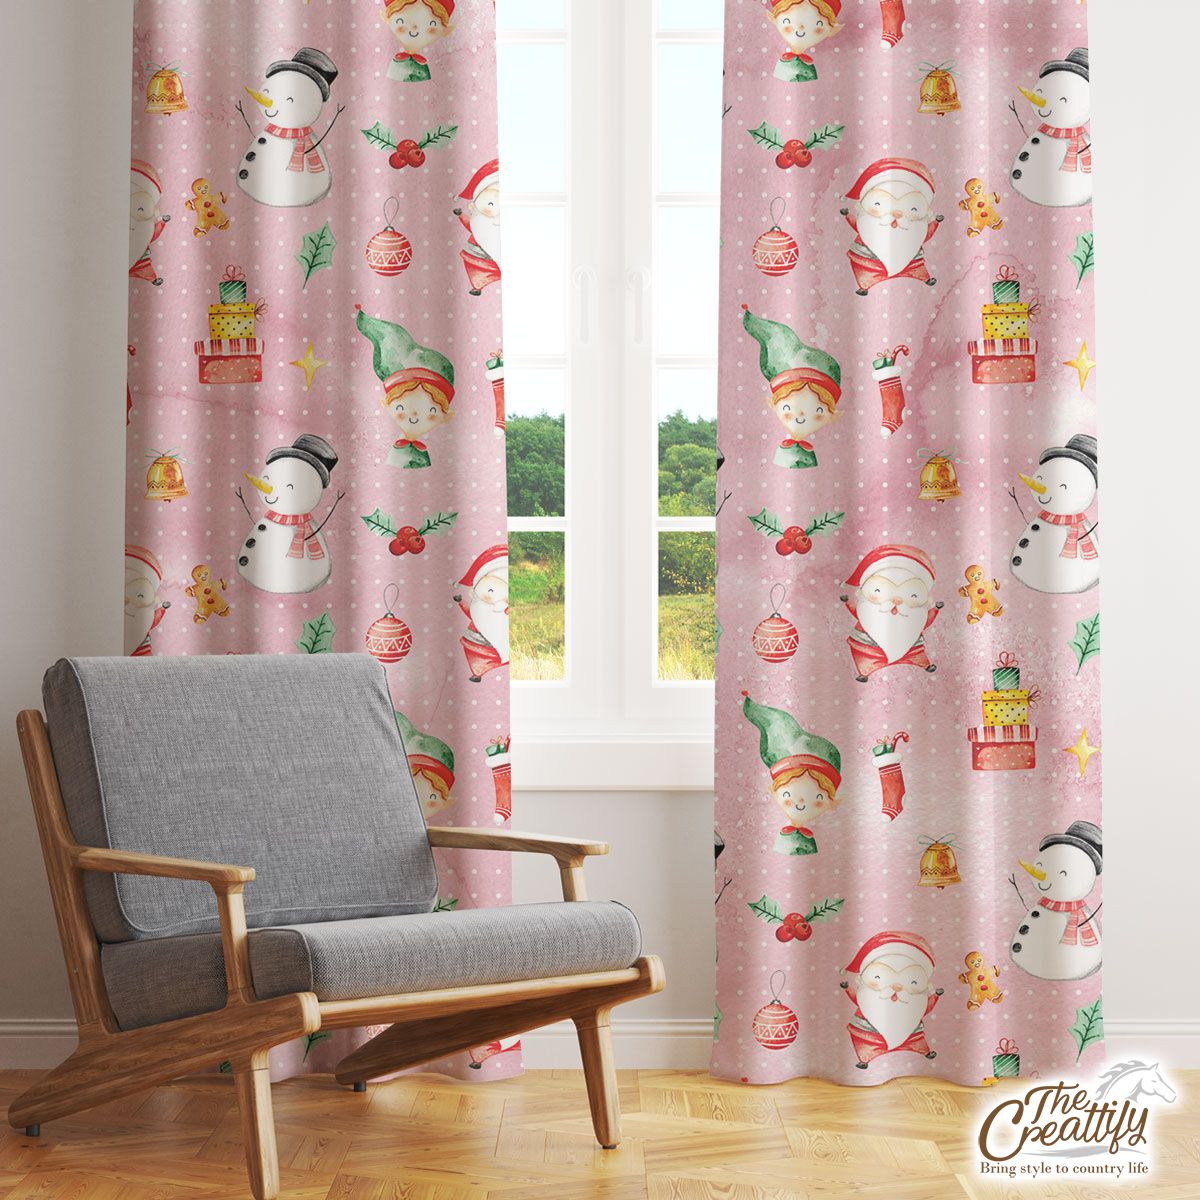 Santa Clause, Snowman And Christmas Elf With Christmas Gifts Window Curtain